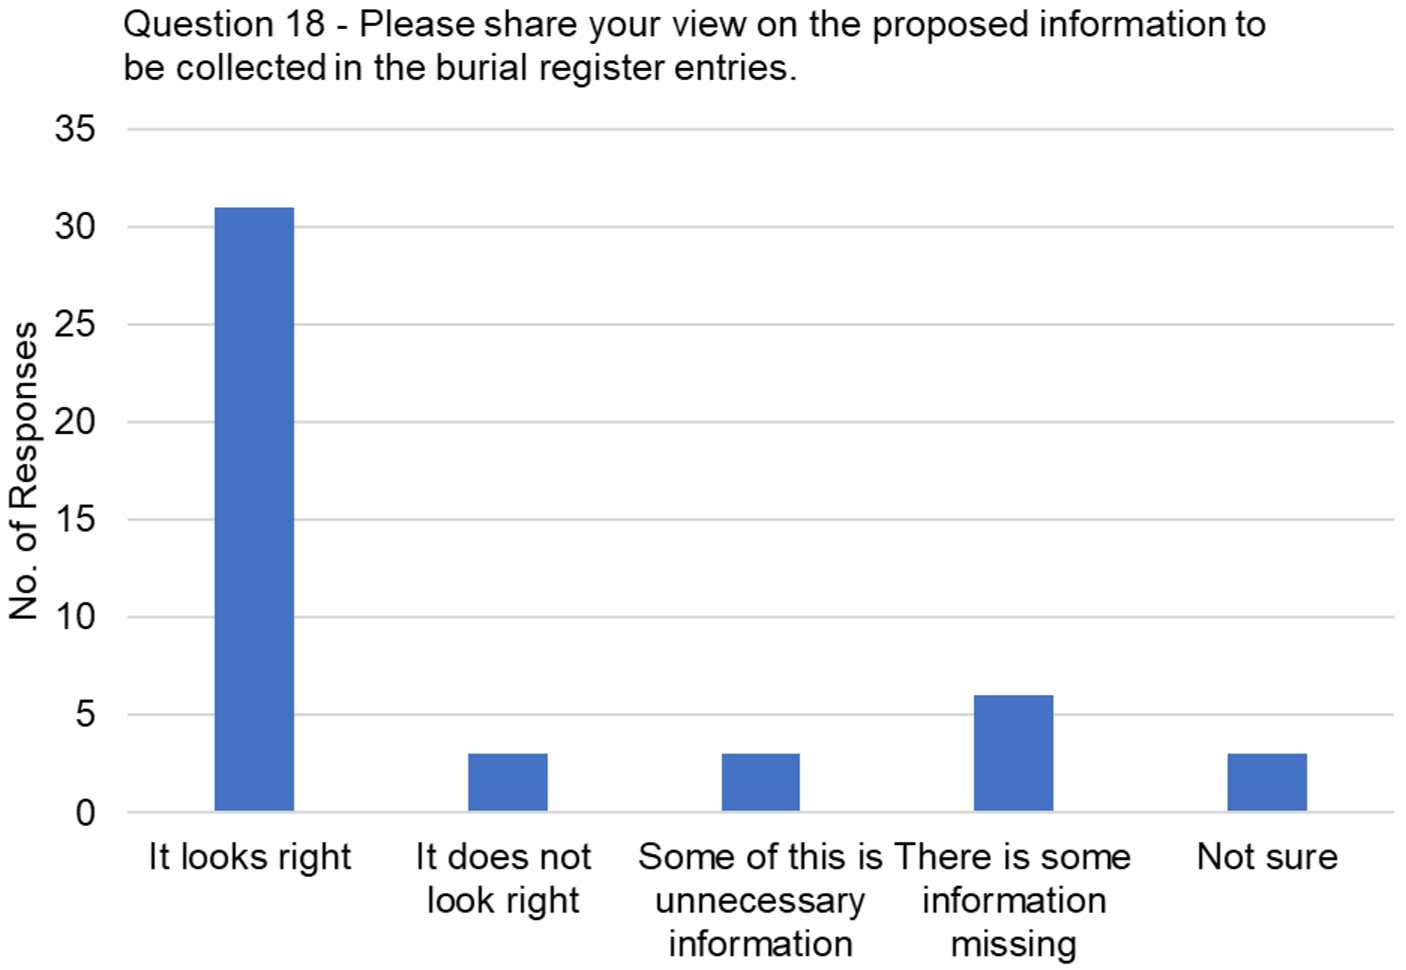 The graph visually presents the data from table 13, focussing on the responses to the question, "Please share your view on the proposed information to be collected in the burial register entries."